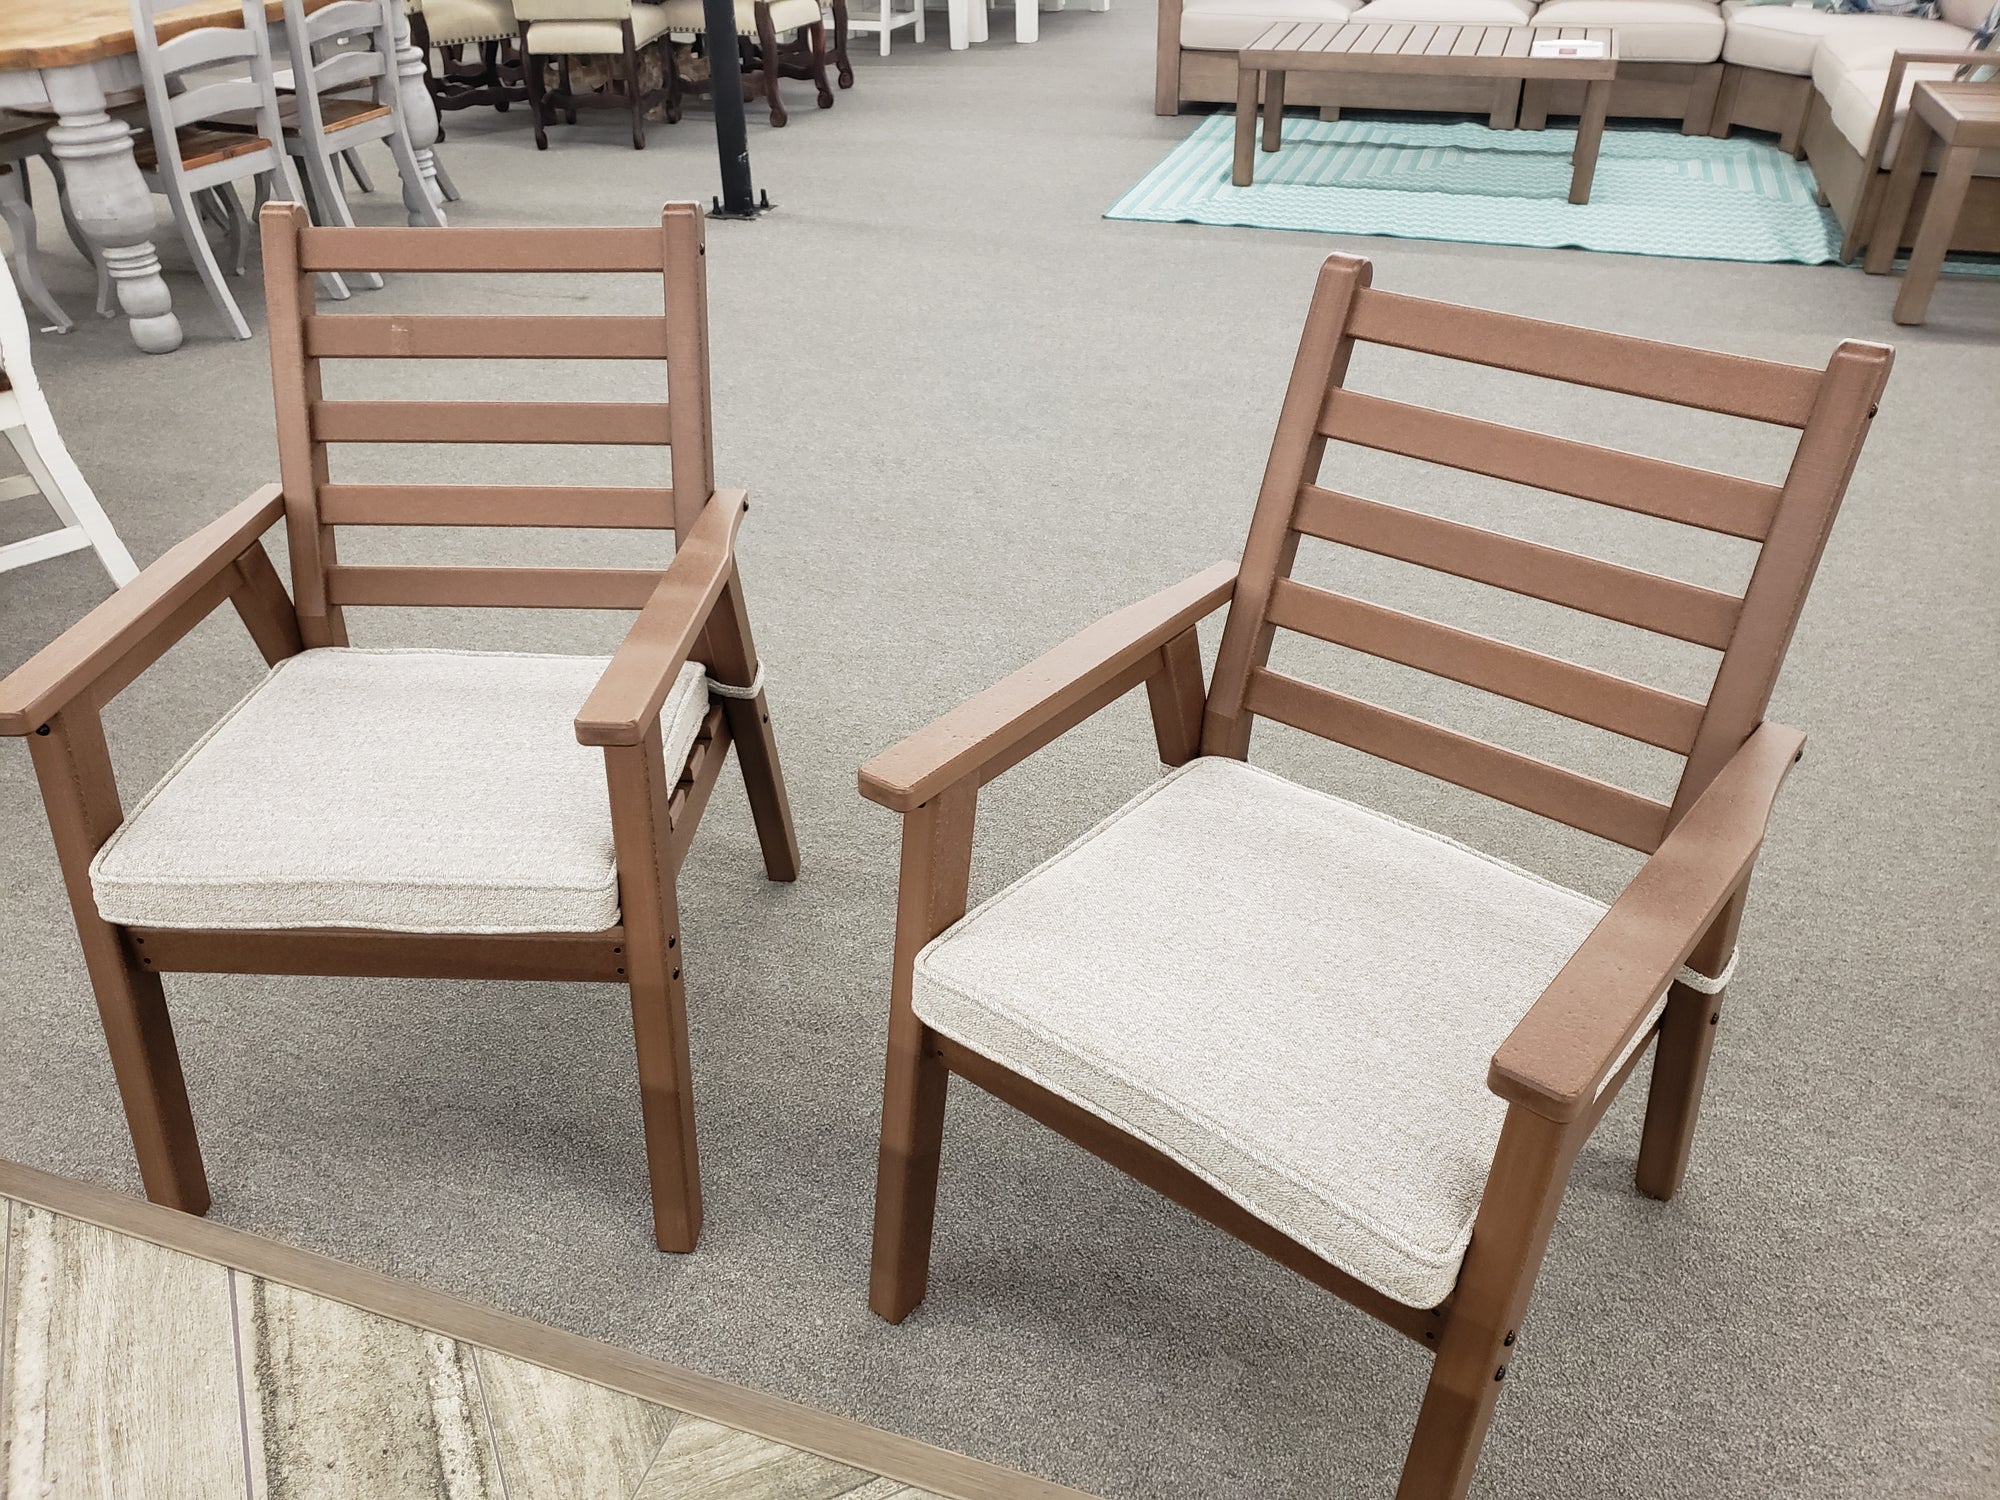 P531-FI-A 2 Piece Outdoor Arm Chairs